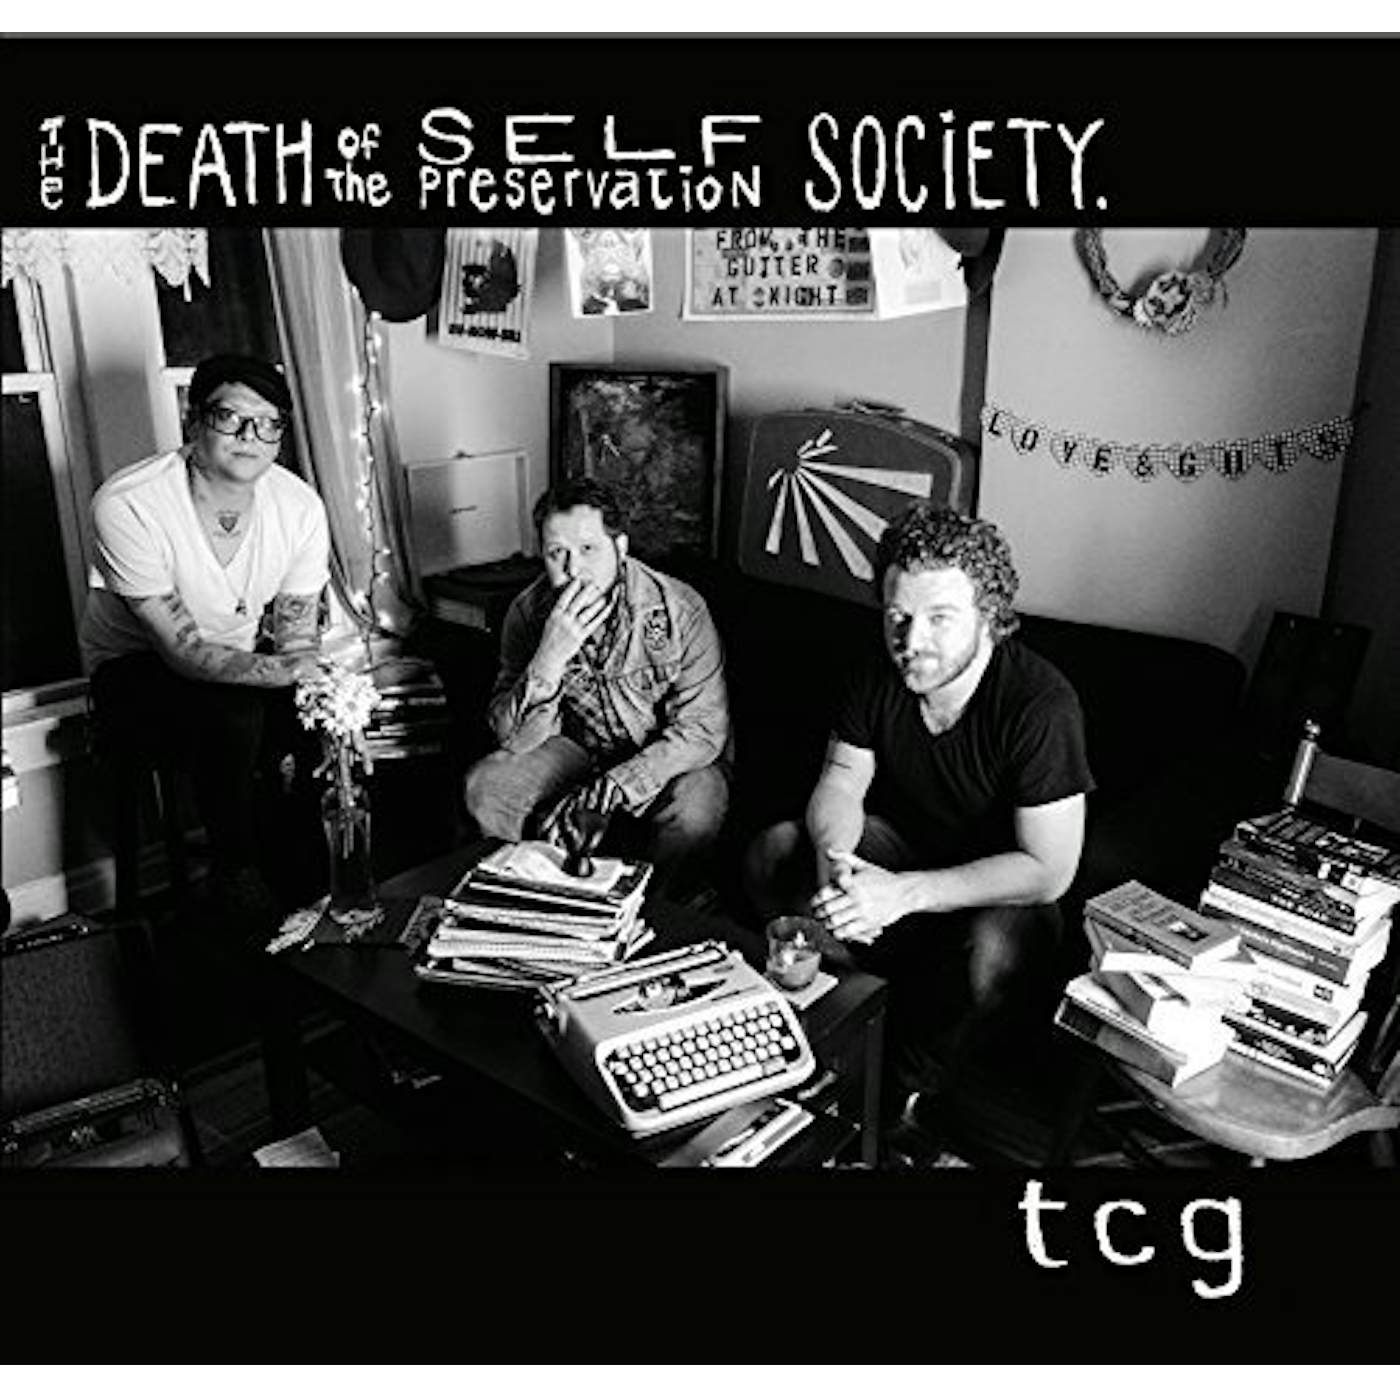 Two Cow Garage DEATH OF THE SELF-PRESERVATION SOCIETY CD